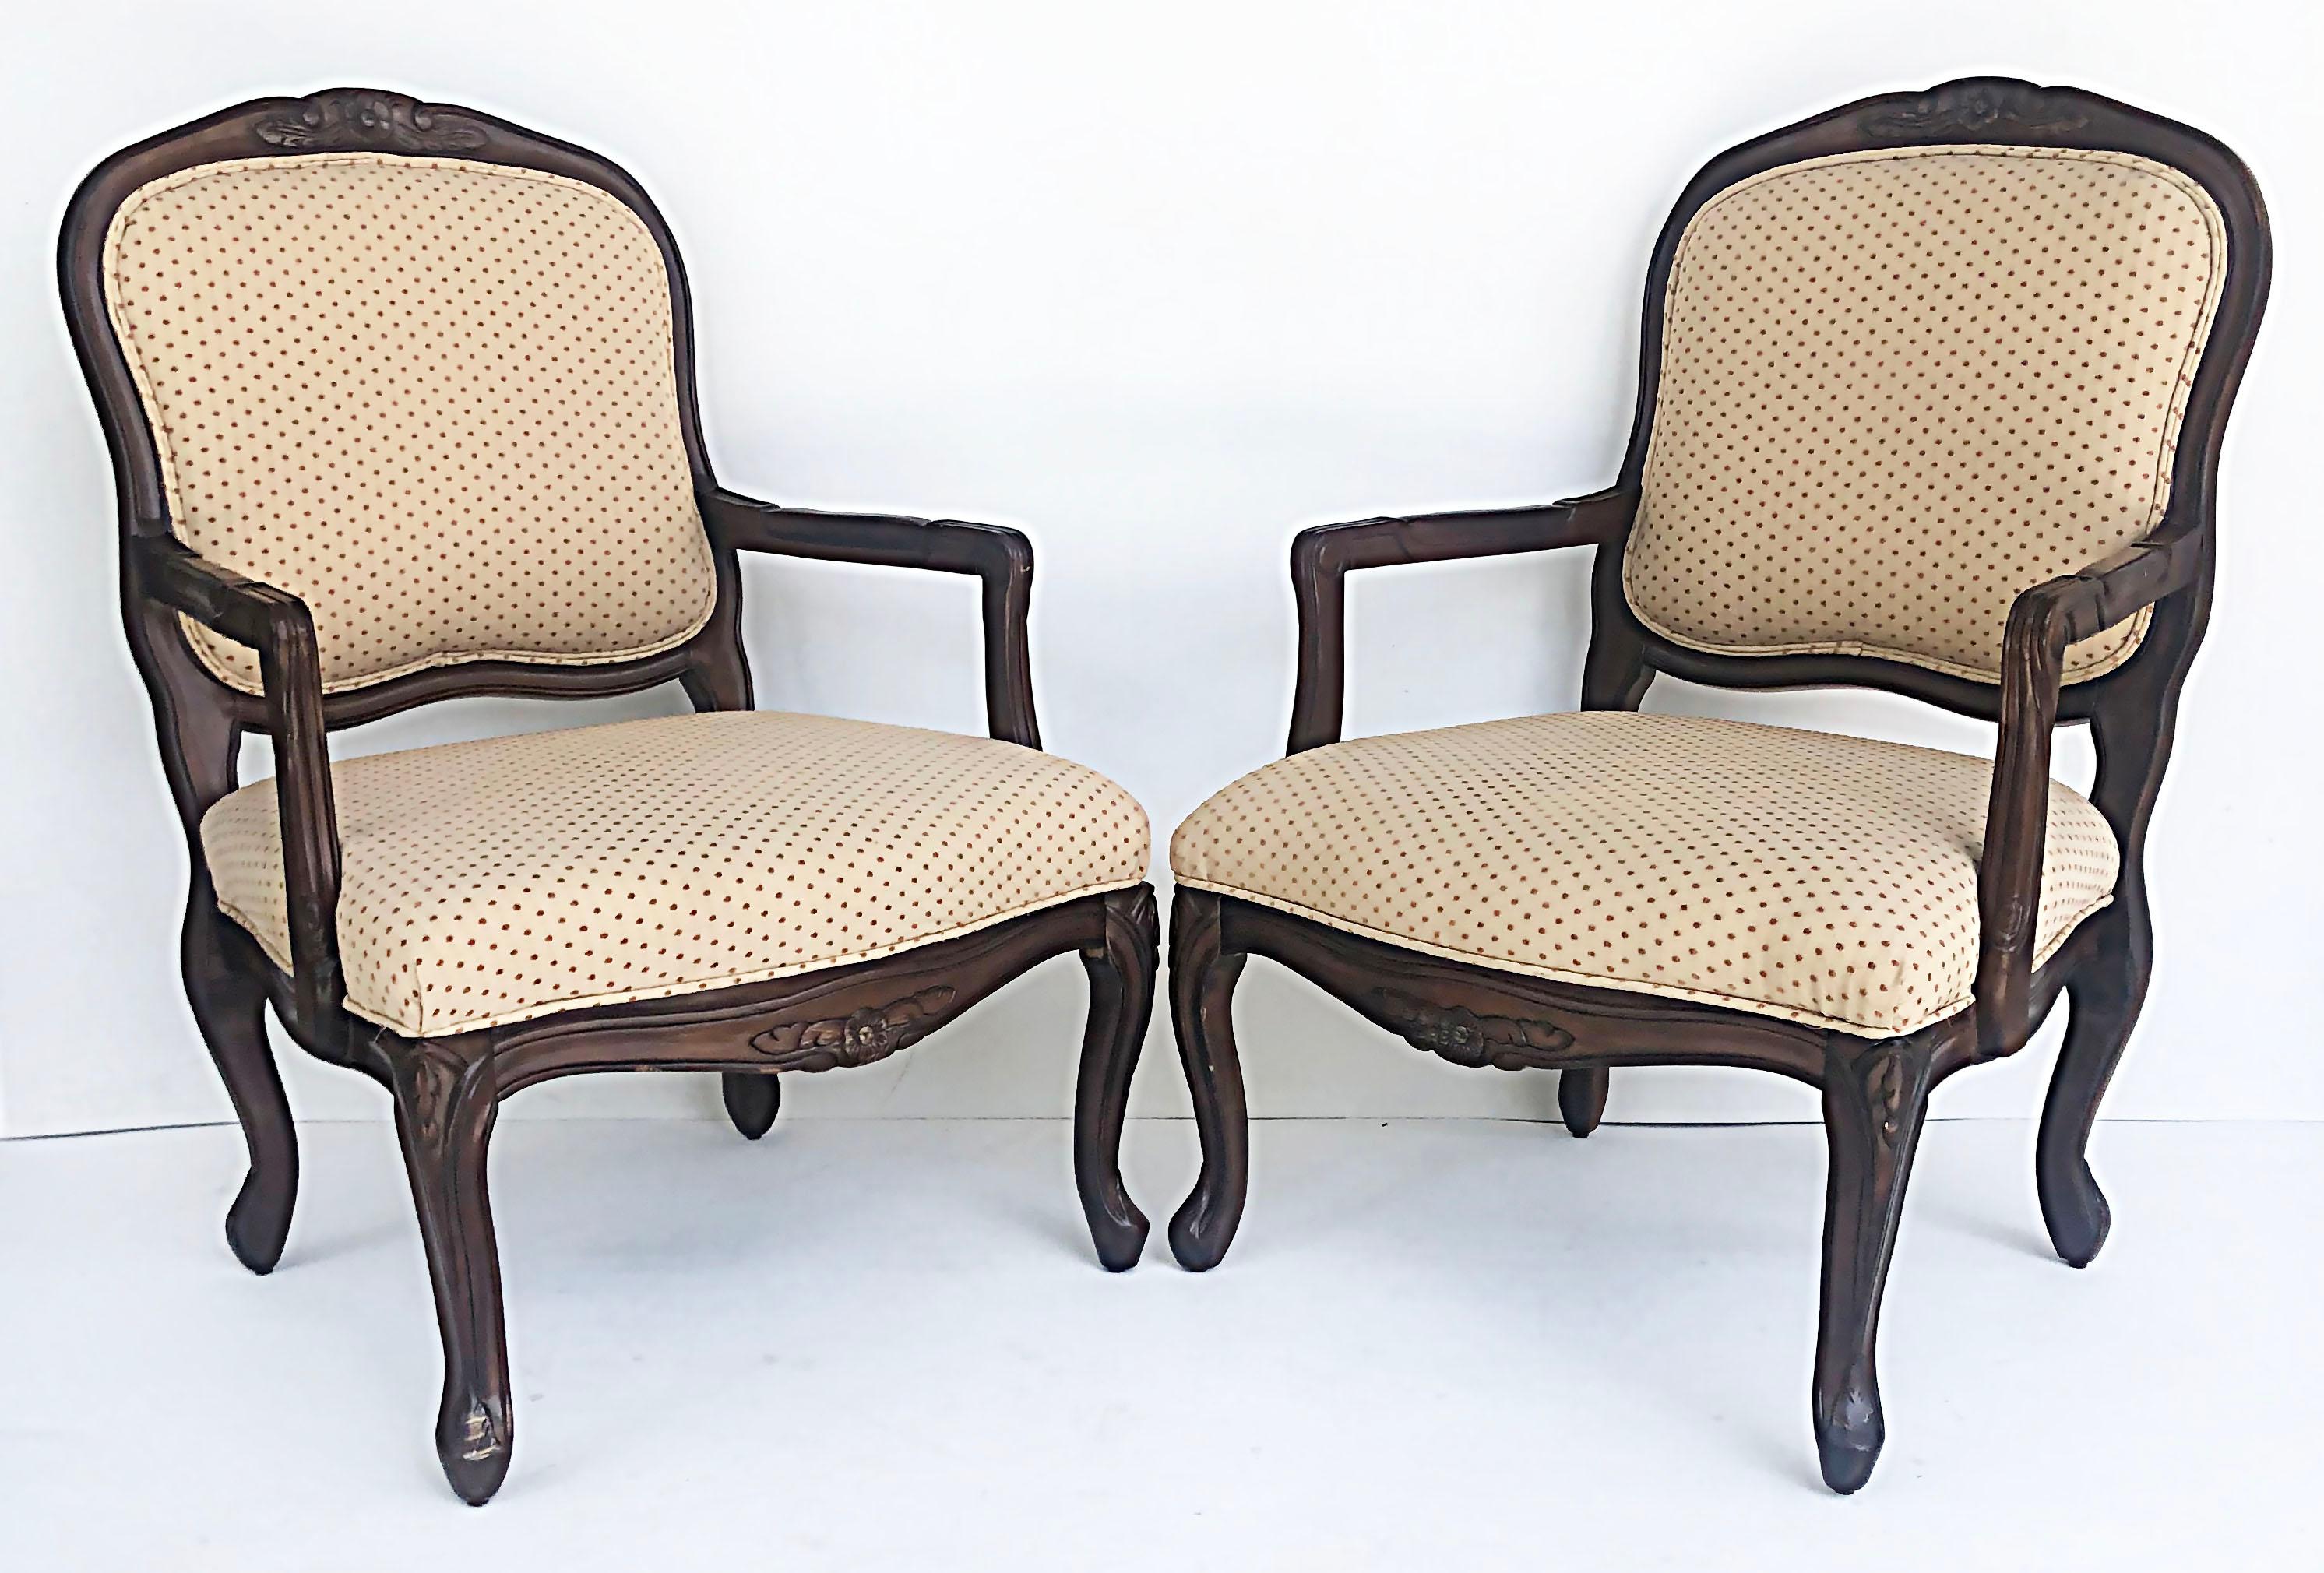 French Provincial Louis XV Style Fauteuils with Cabriole legs

Offered for sale is a pair of mid- late 20th century French Provincial style Louis XV style fauteuils with cabriole legs. These armchairs are substantial and are a large comfortable